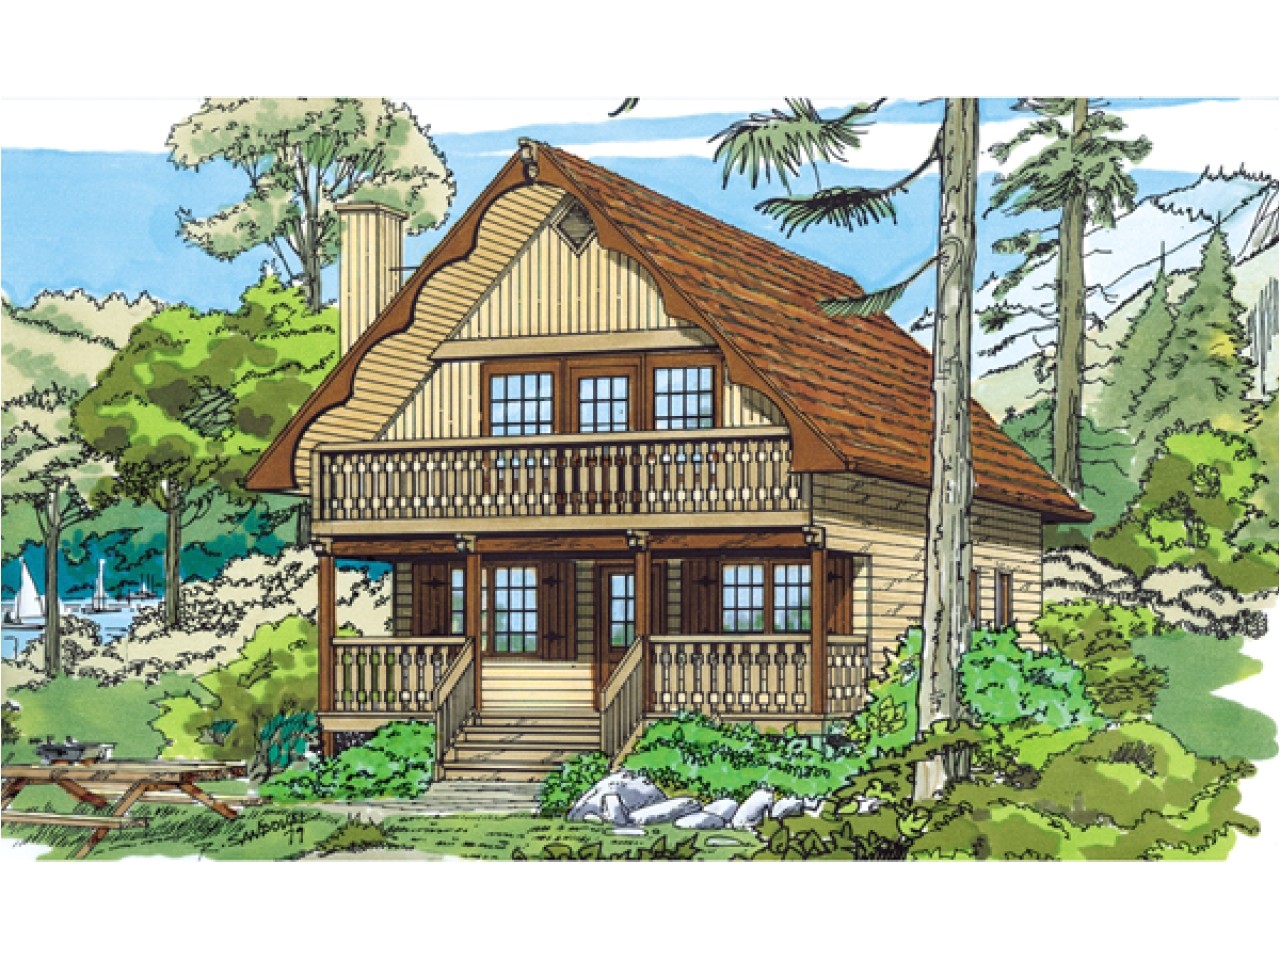 Mountain Chalet Home Plans Mountain Chalet House Plans Swiss Chalet Style House Plans